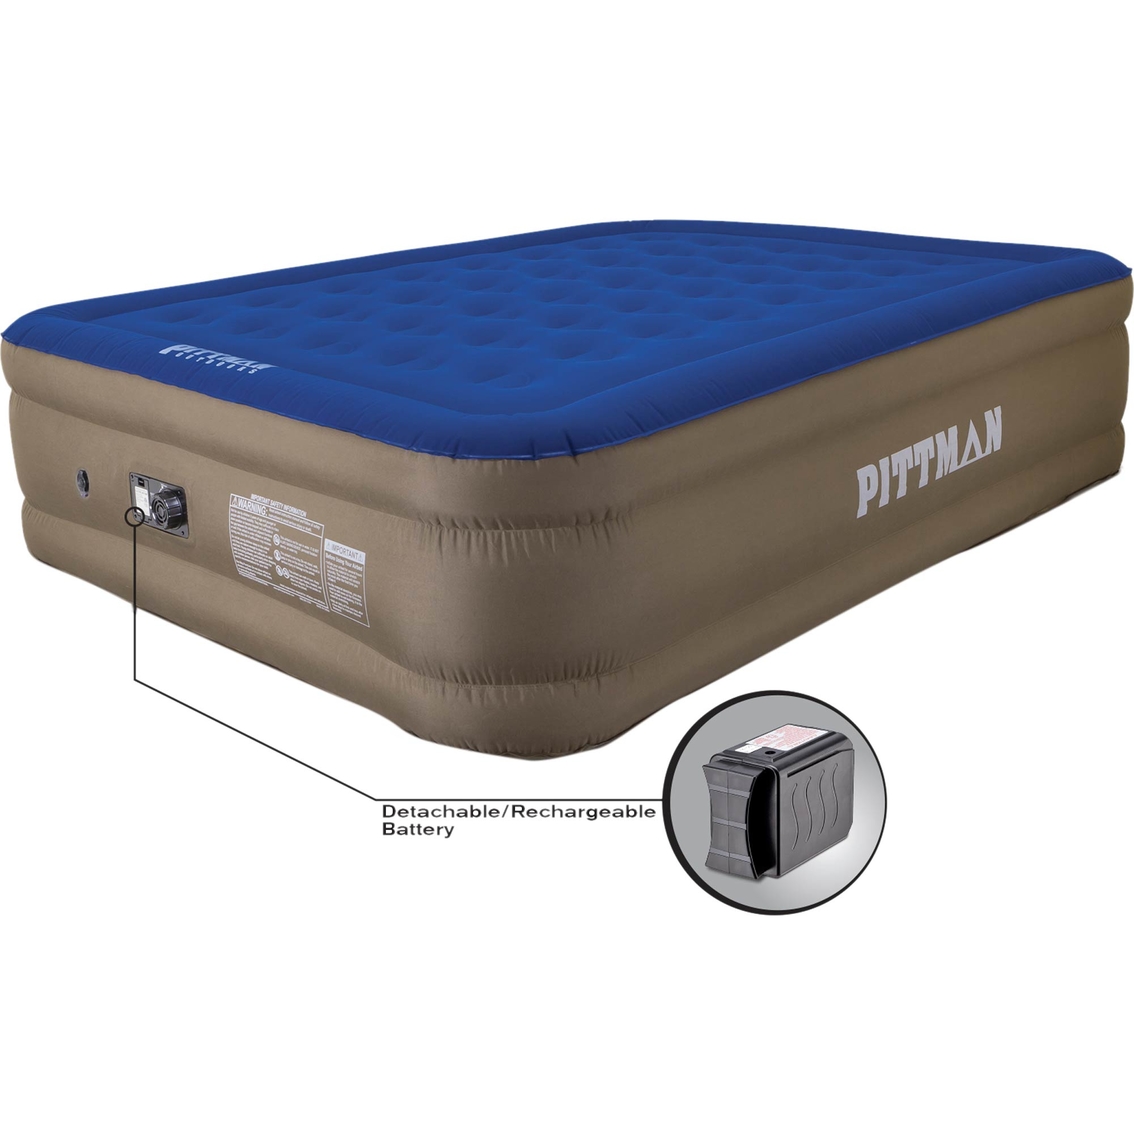 Pittman Outdoors Queen Fabric Xtreme 20 In. With Built-in Electric Air Pump - Image 2 of 3